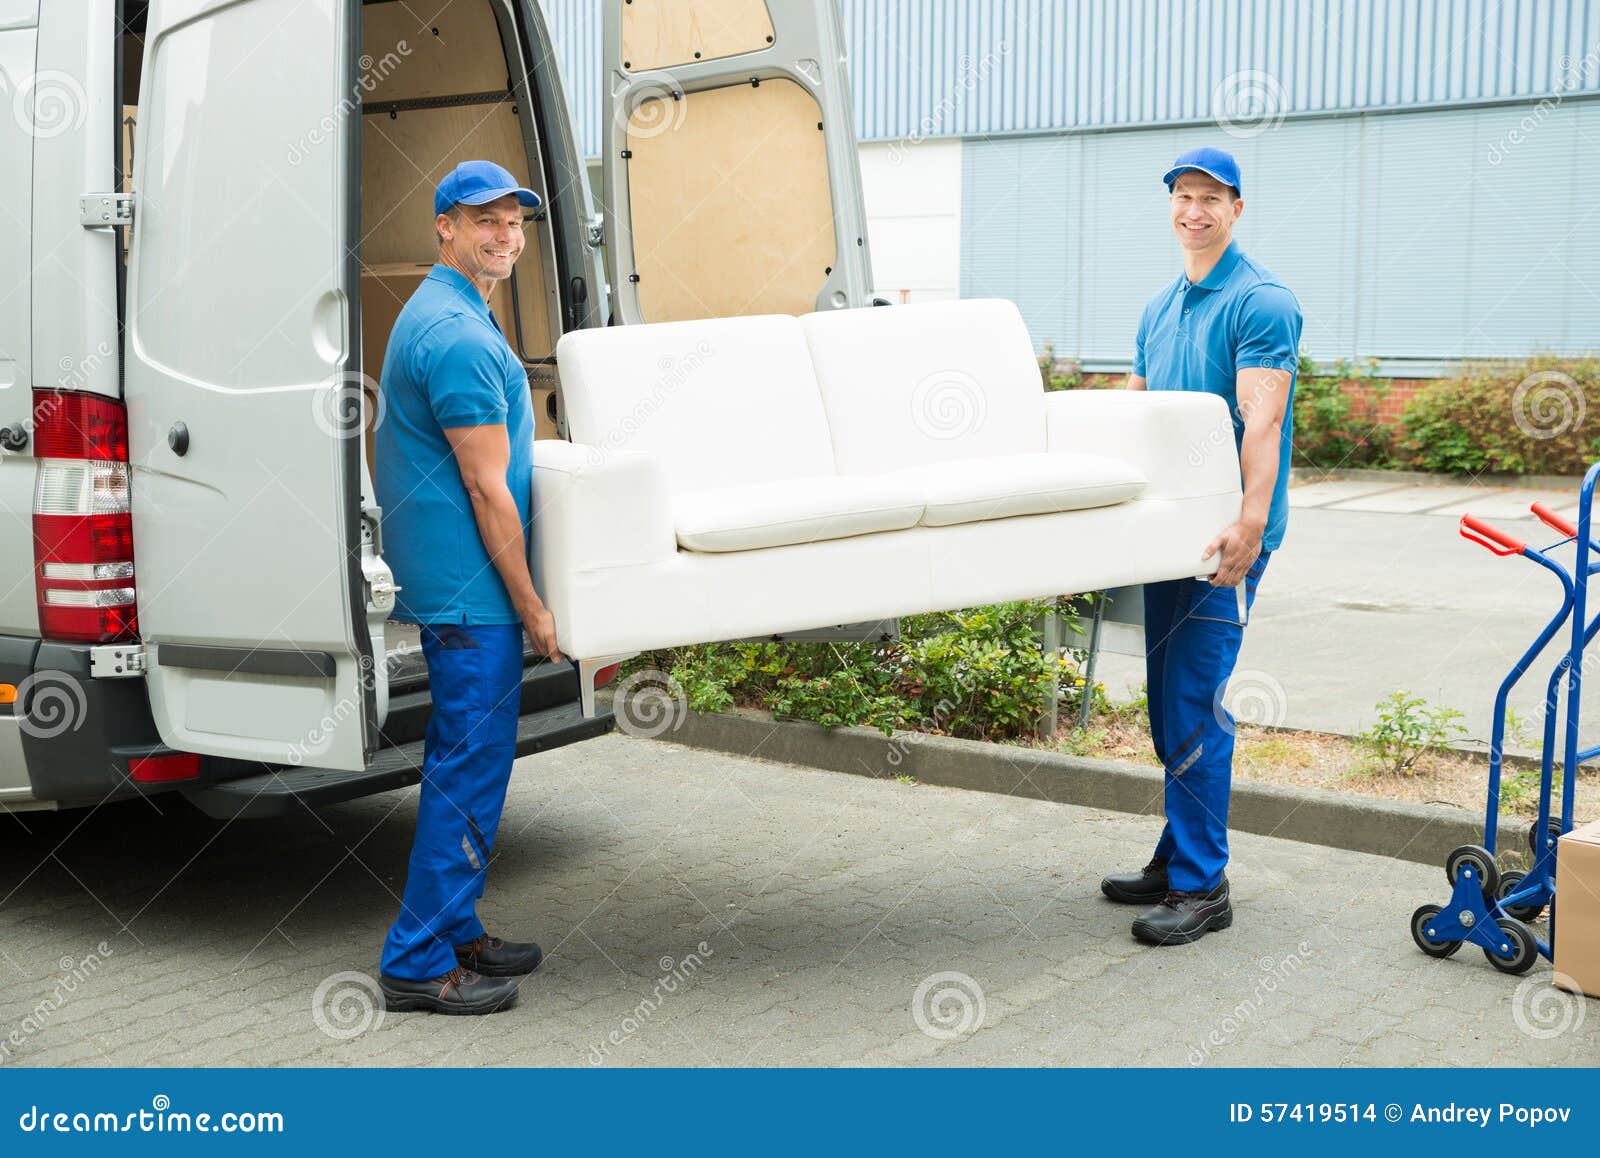 workers putting furniture and boxes in truck